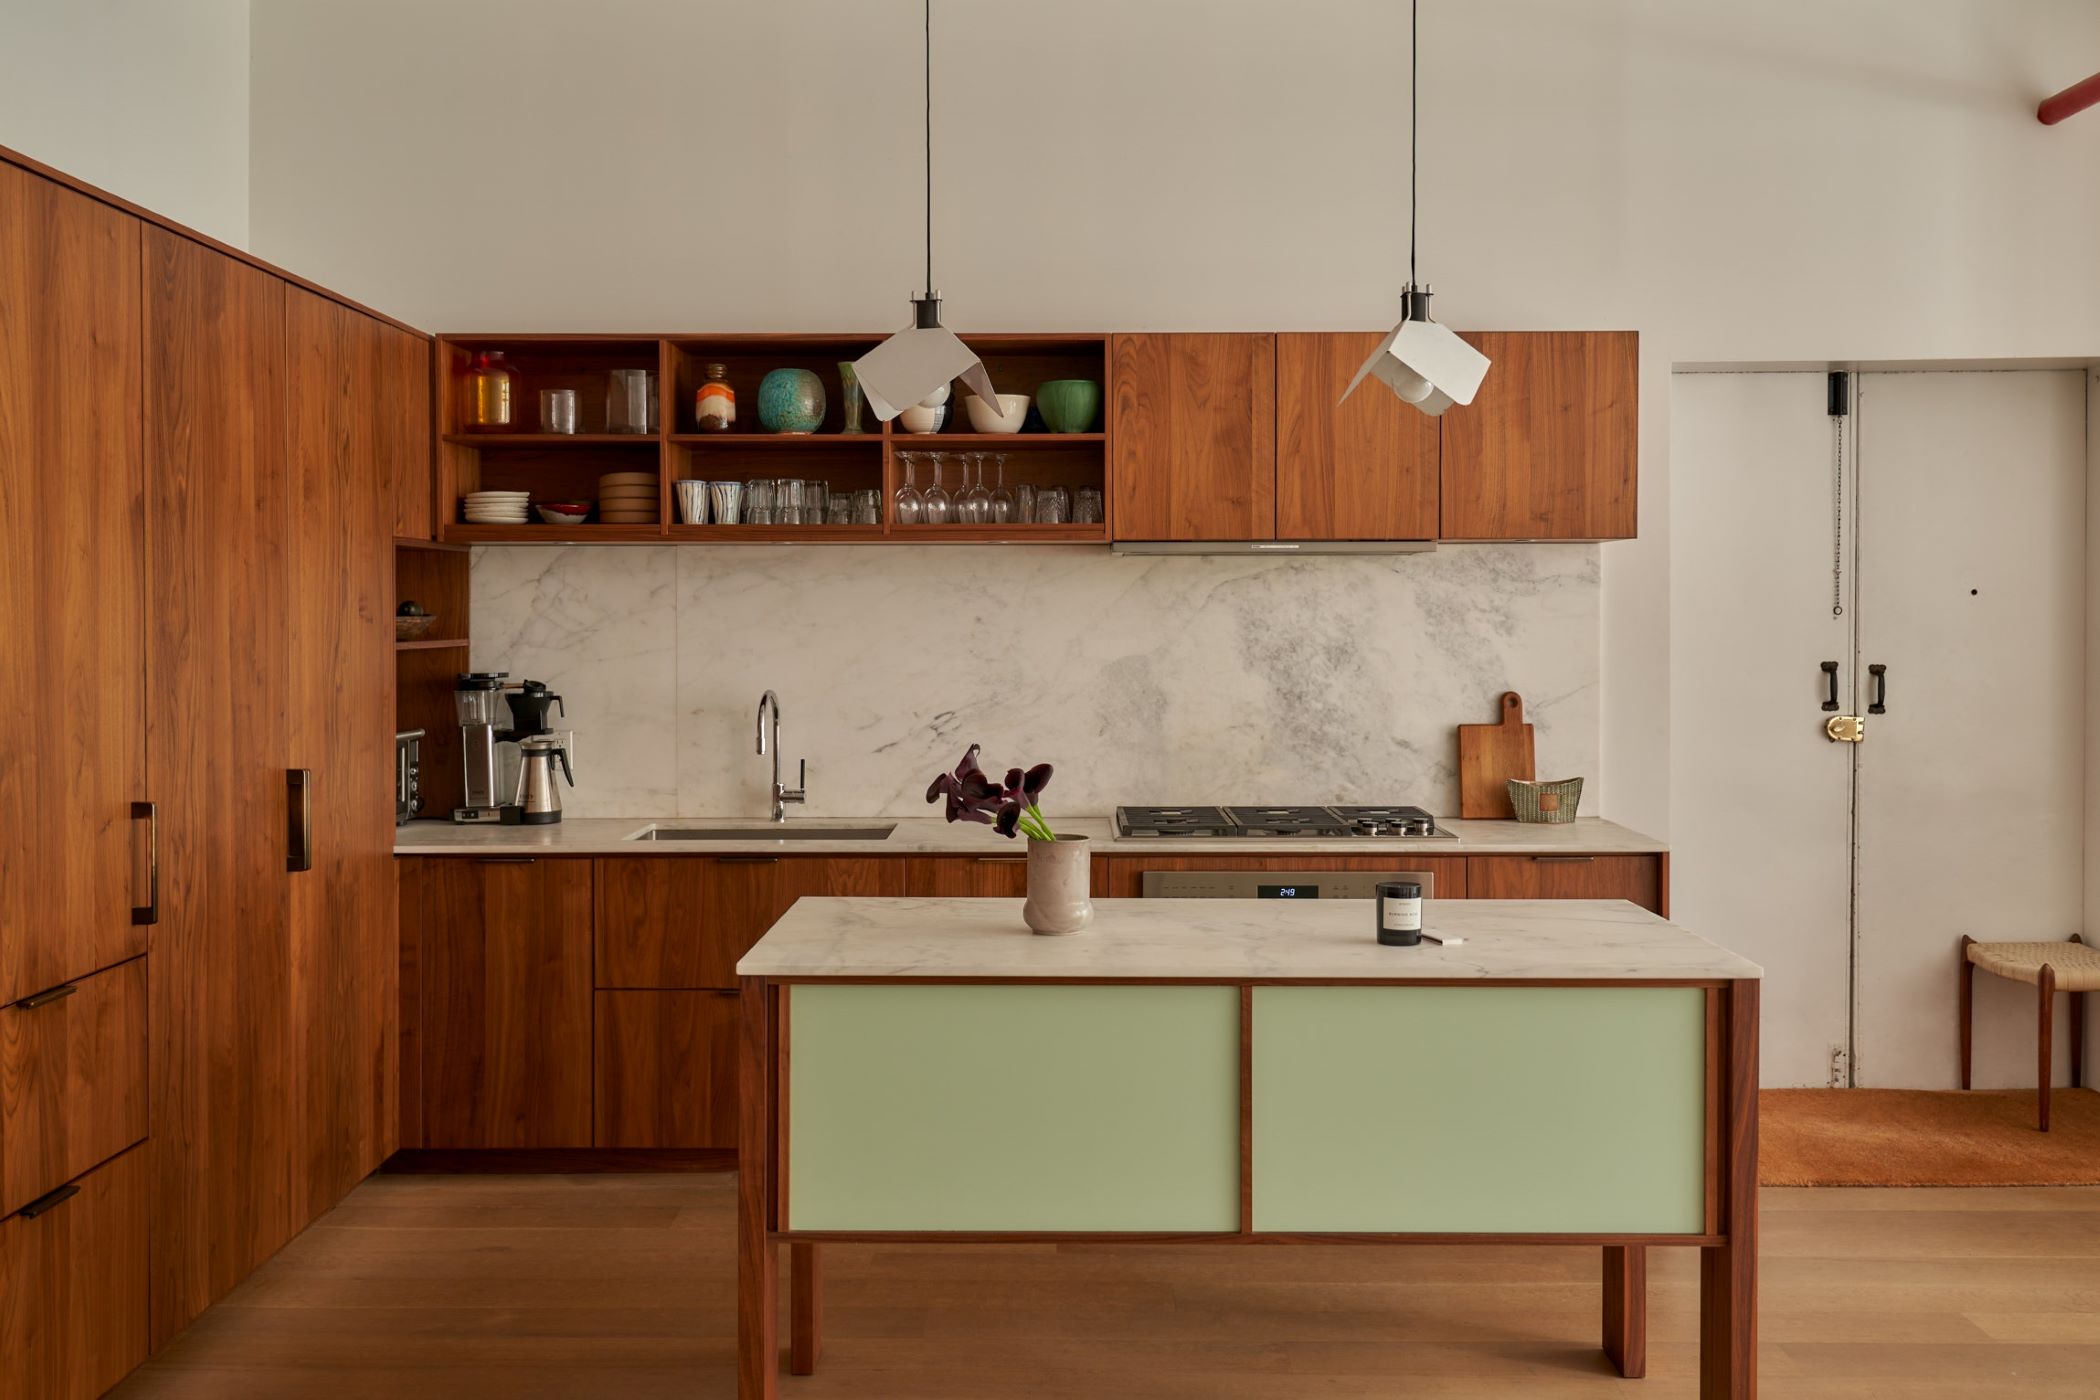 How To Design A Small Kitchen On The North Side Of The House